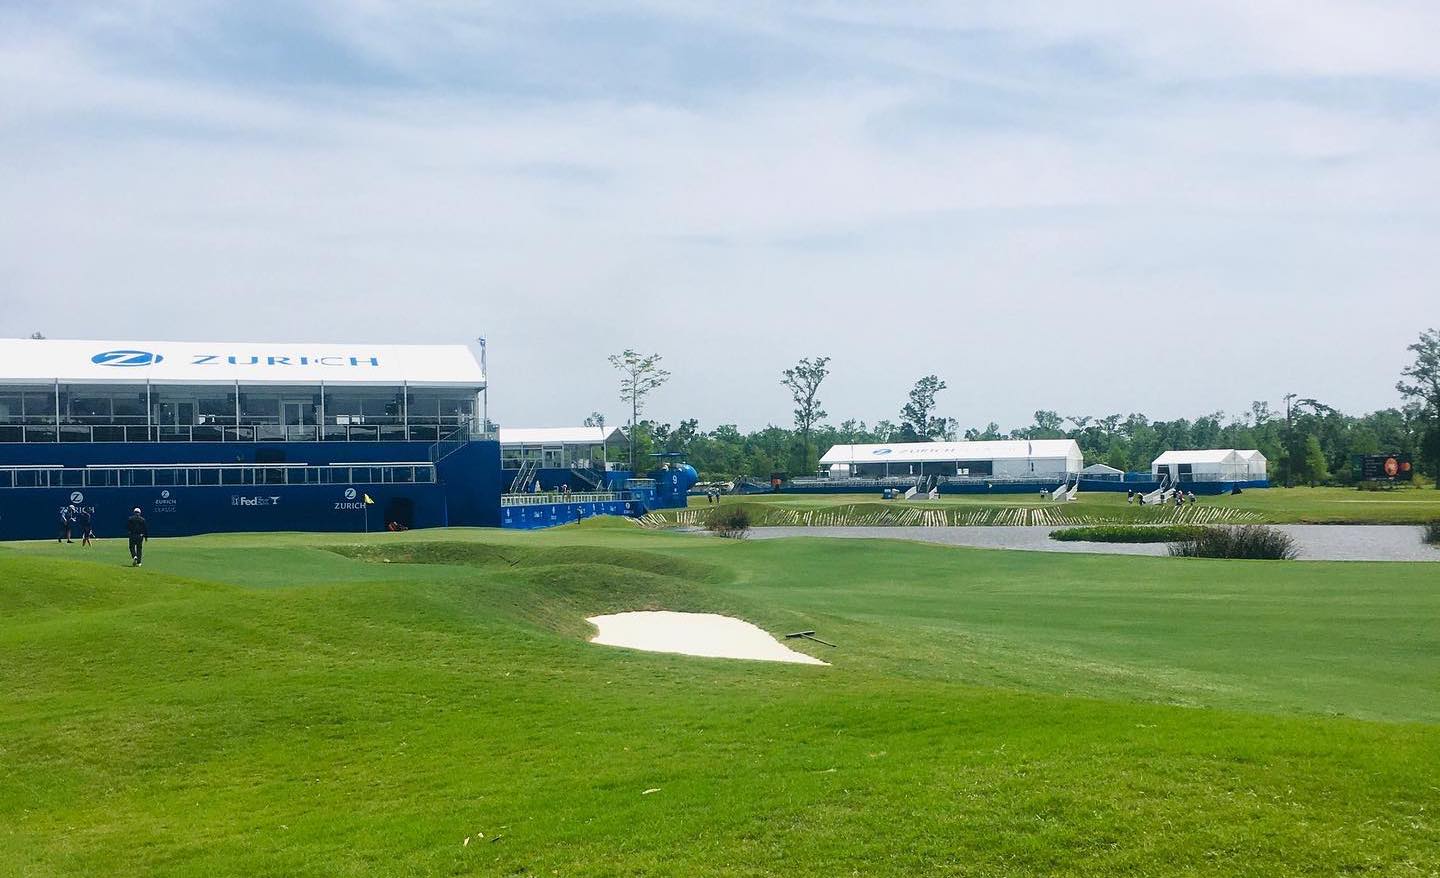 <p>TPC Louisiana, a Pete Dye design hosting the Zurich Classic since 2007, features hidden bunkers and strategic green complexes reminiscent of TPC Sawgrass, offering a challenging mix of holes.</p>